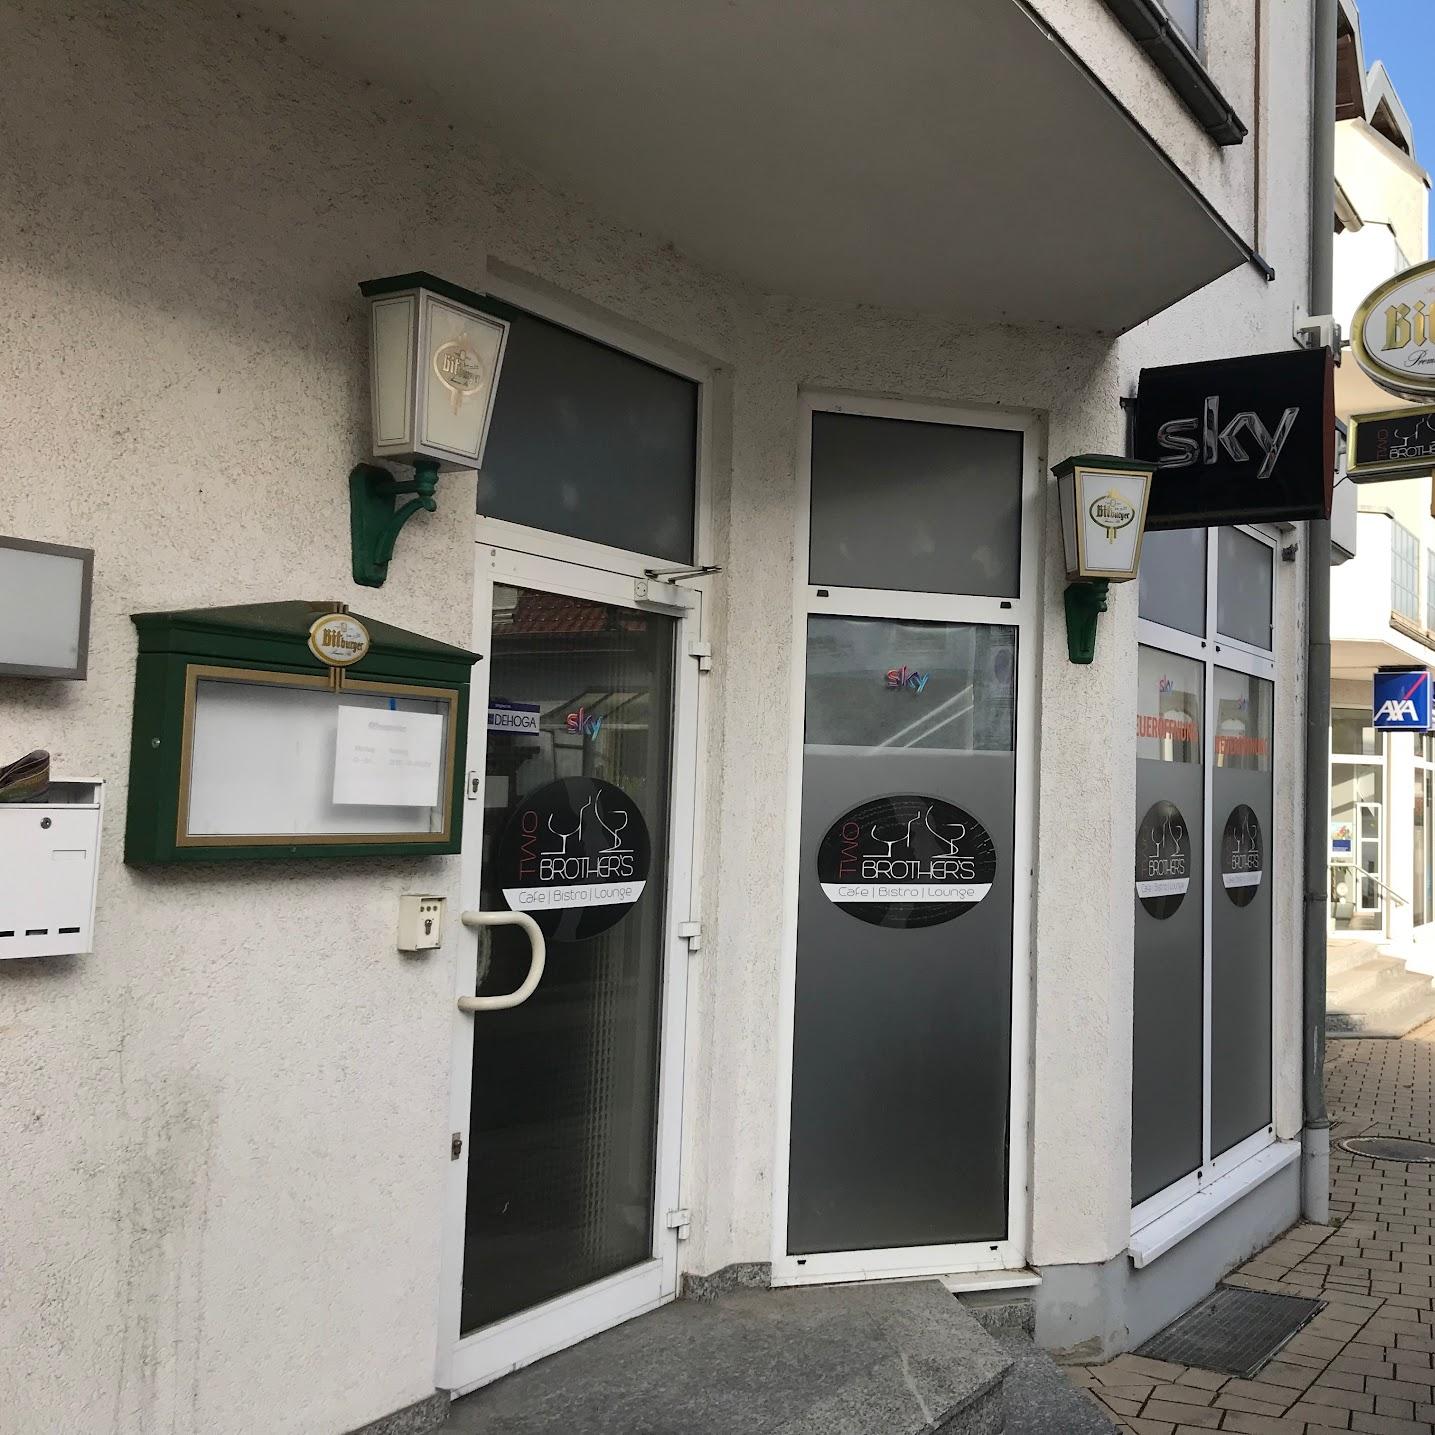 Restaurant "Two Brothers" in Rauenberg